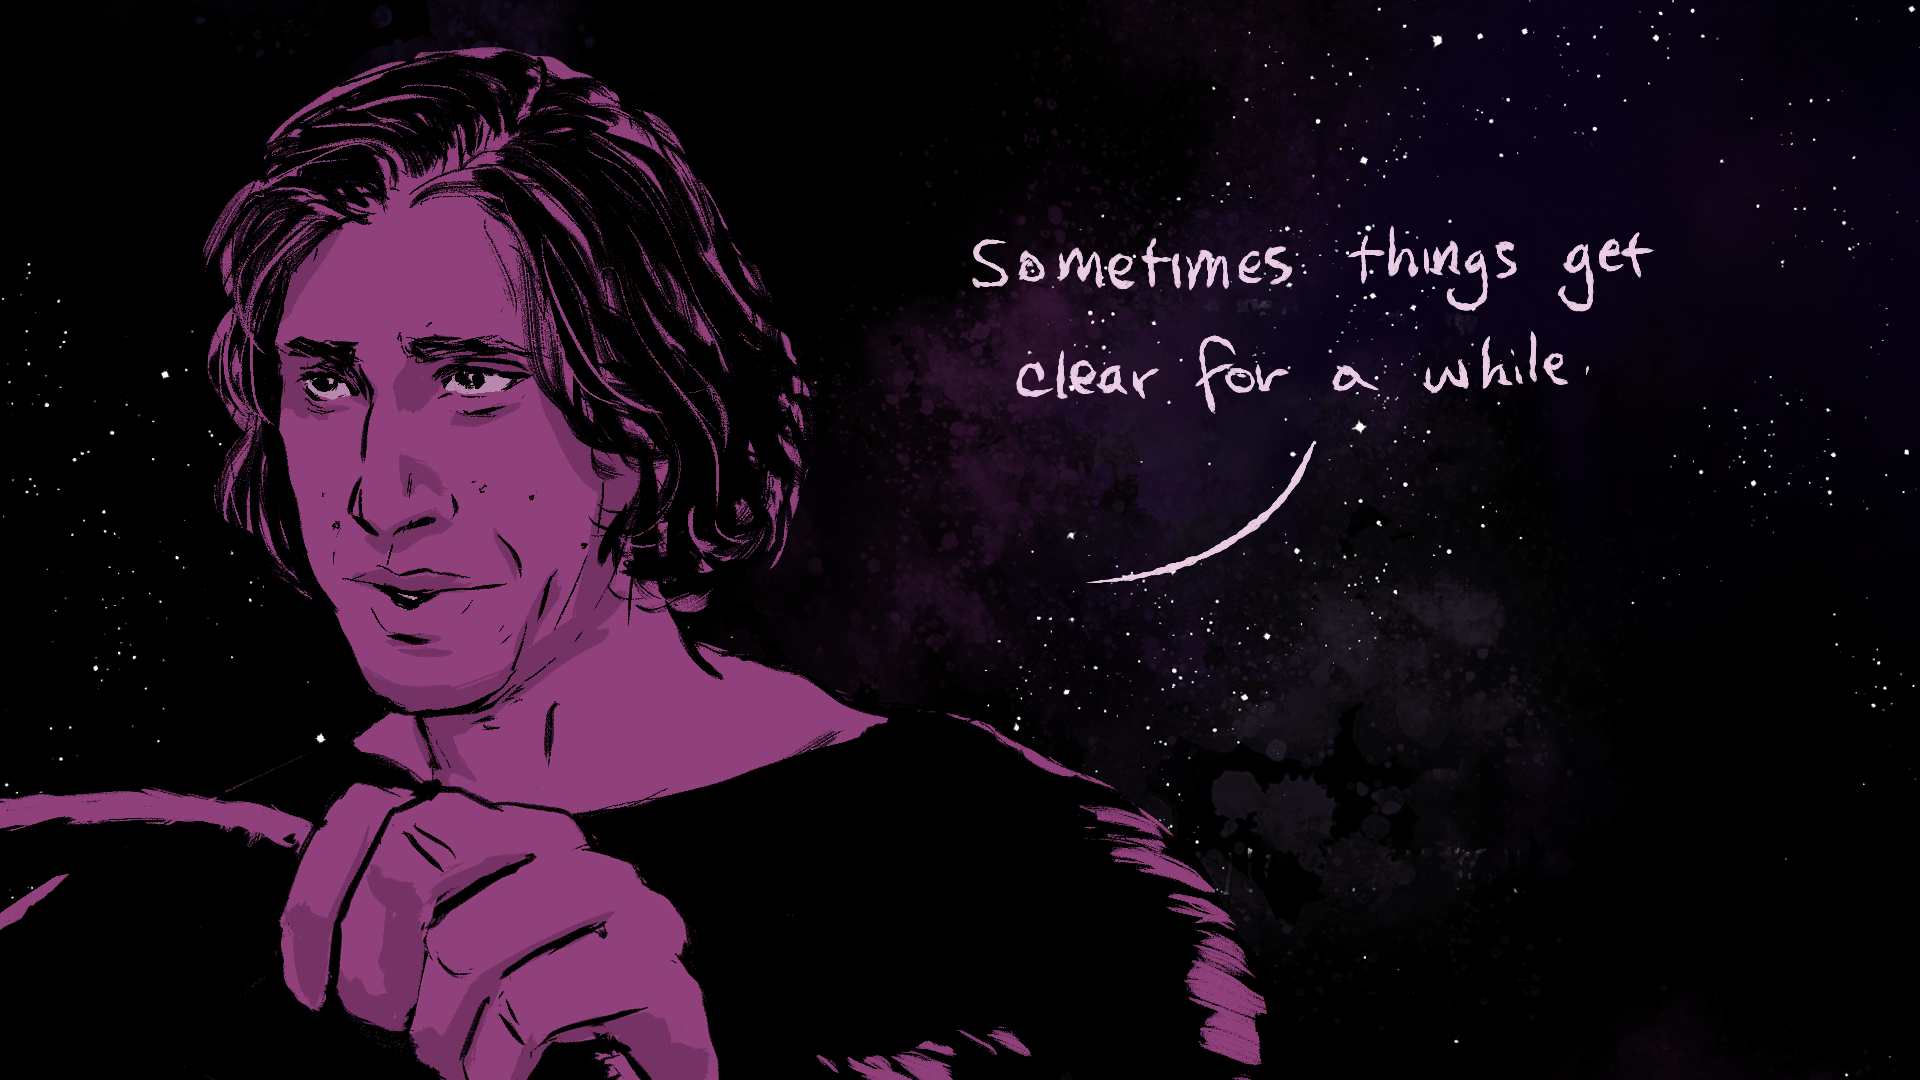 "Sometimes things get clear for a while."